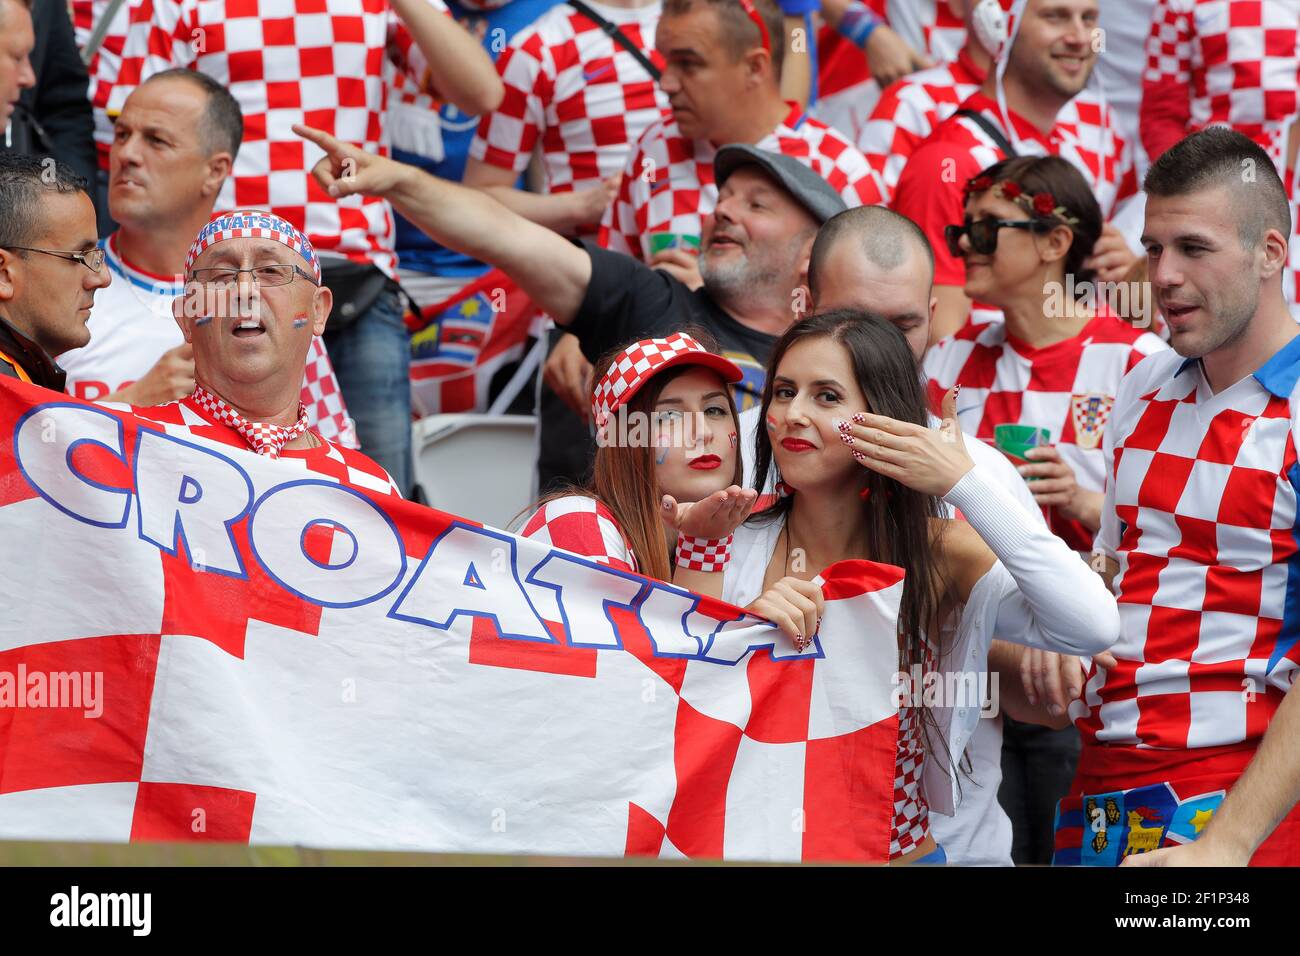 Fans Girls Supporters Of Croatia During The Uefa Euro 16 Group D Football Match Between Turkey